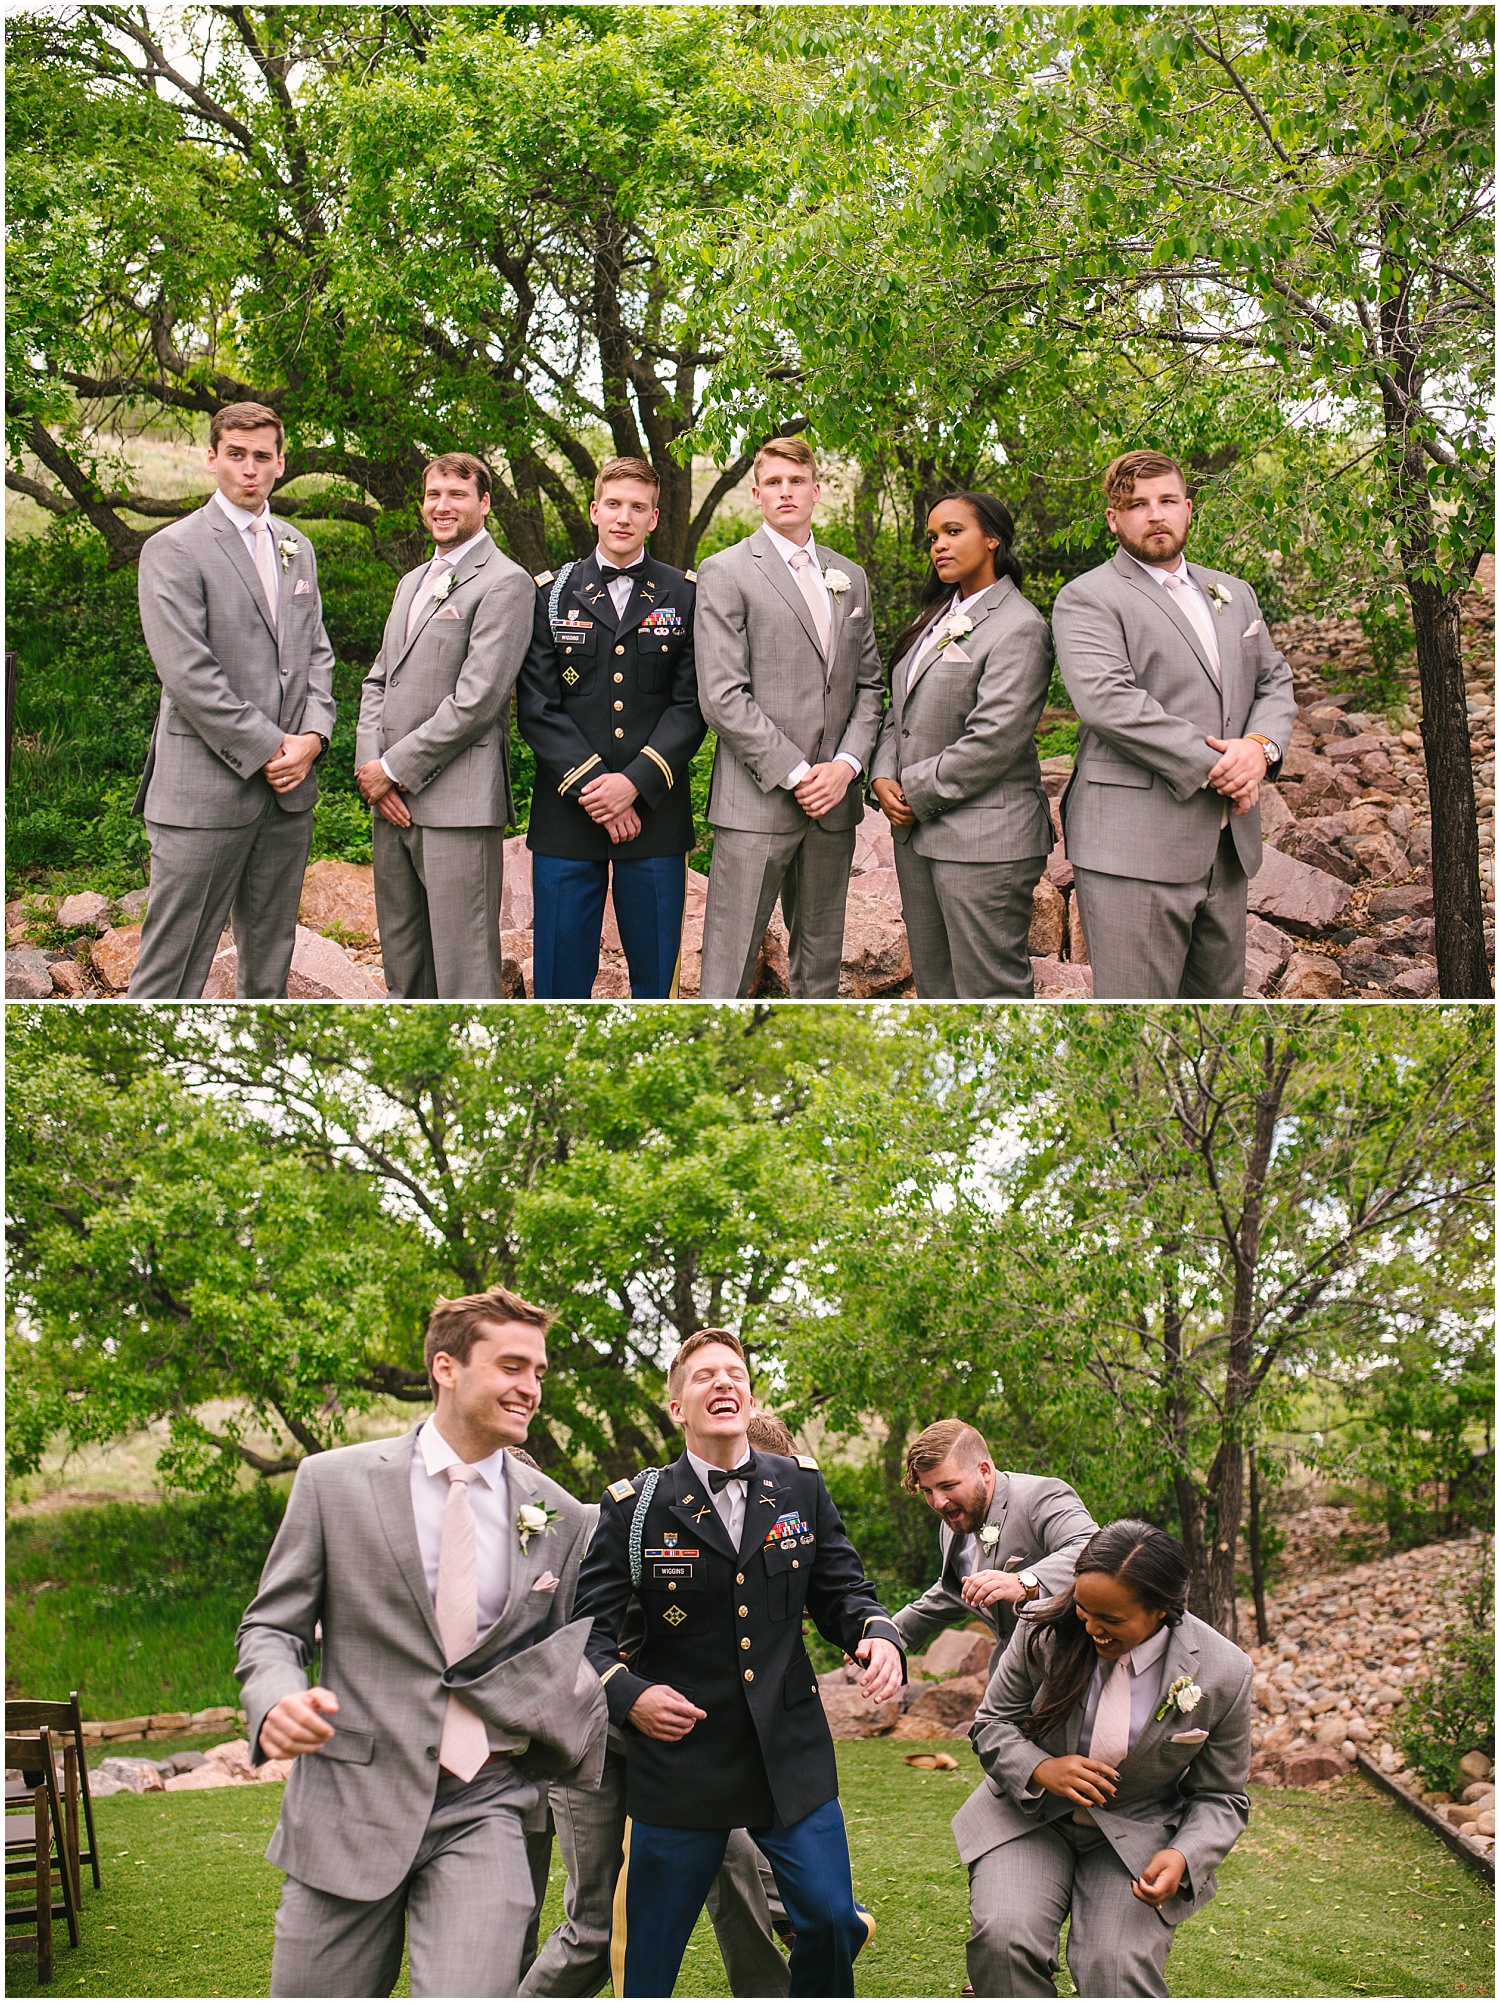 Groomsmen portraits at military wedding at Creekside Event Center in Colorado Springs